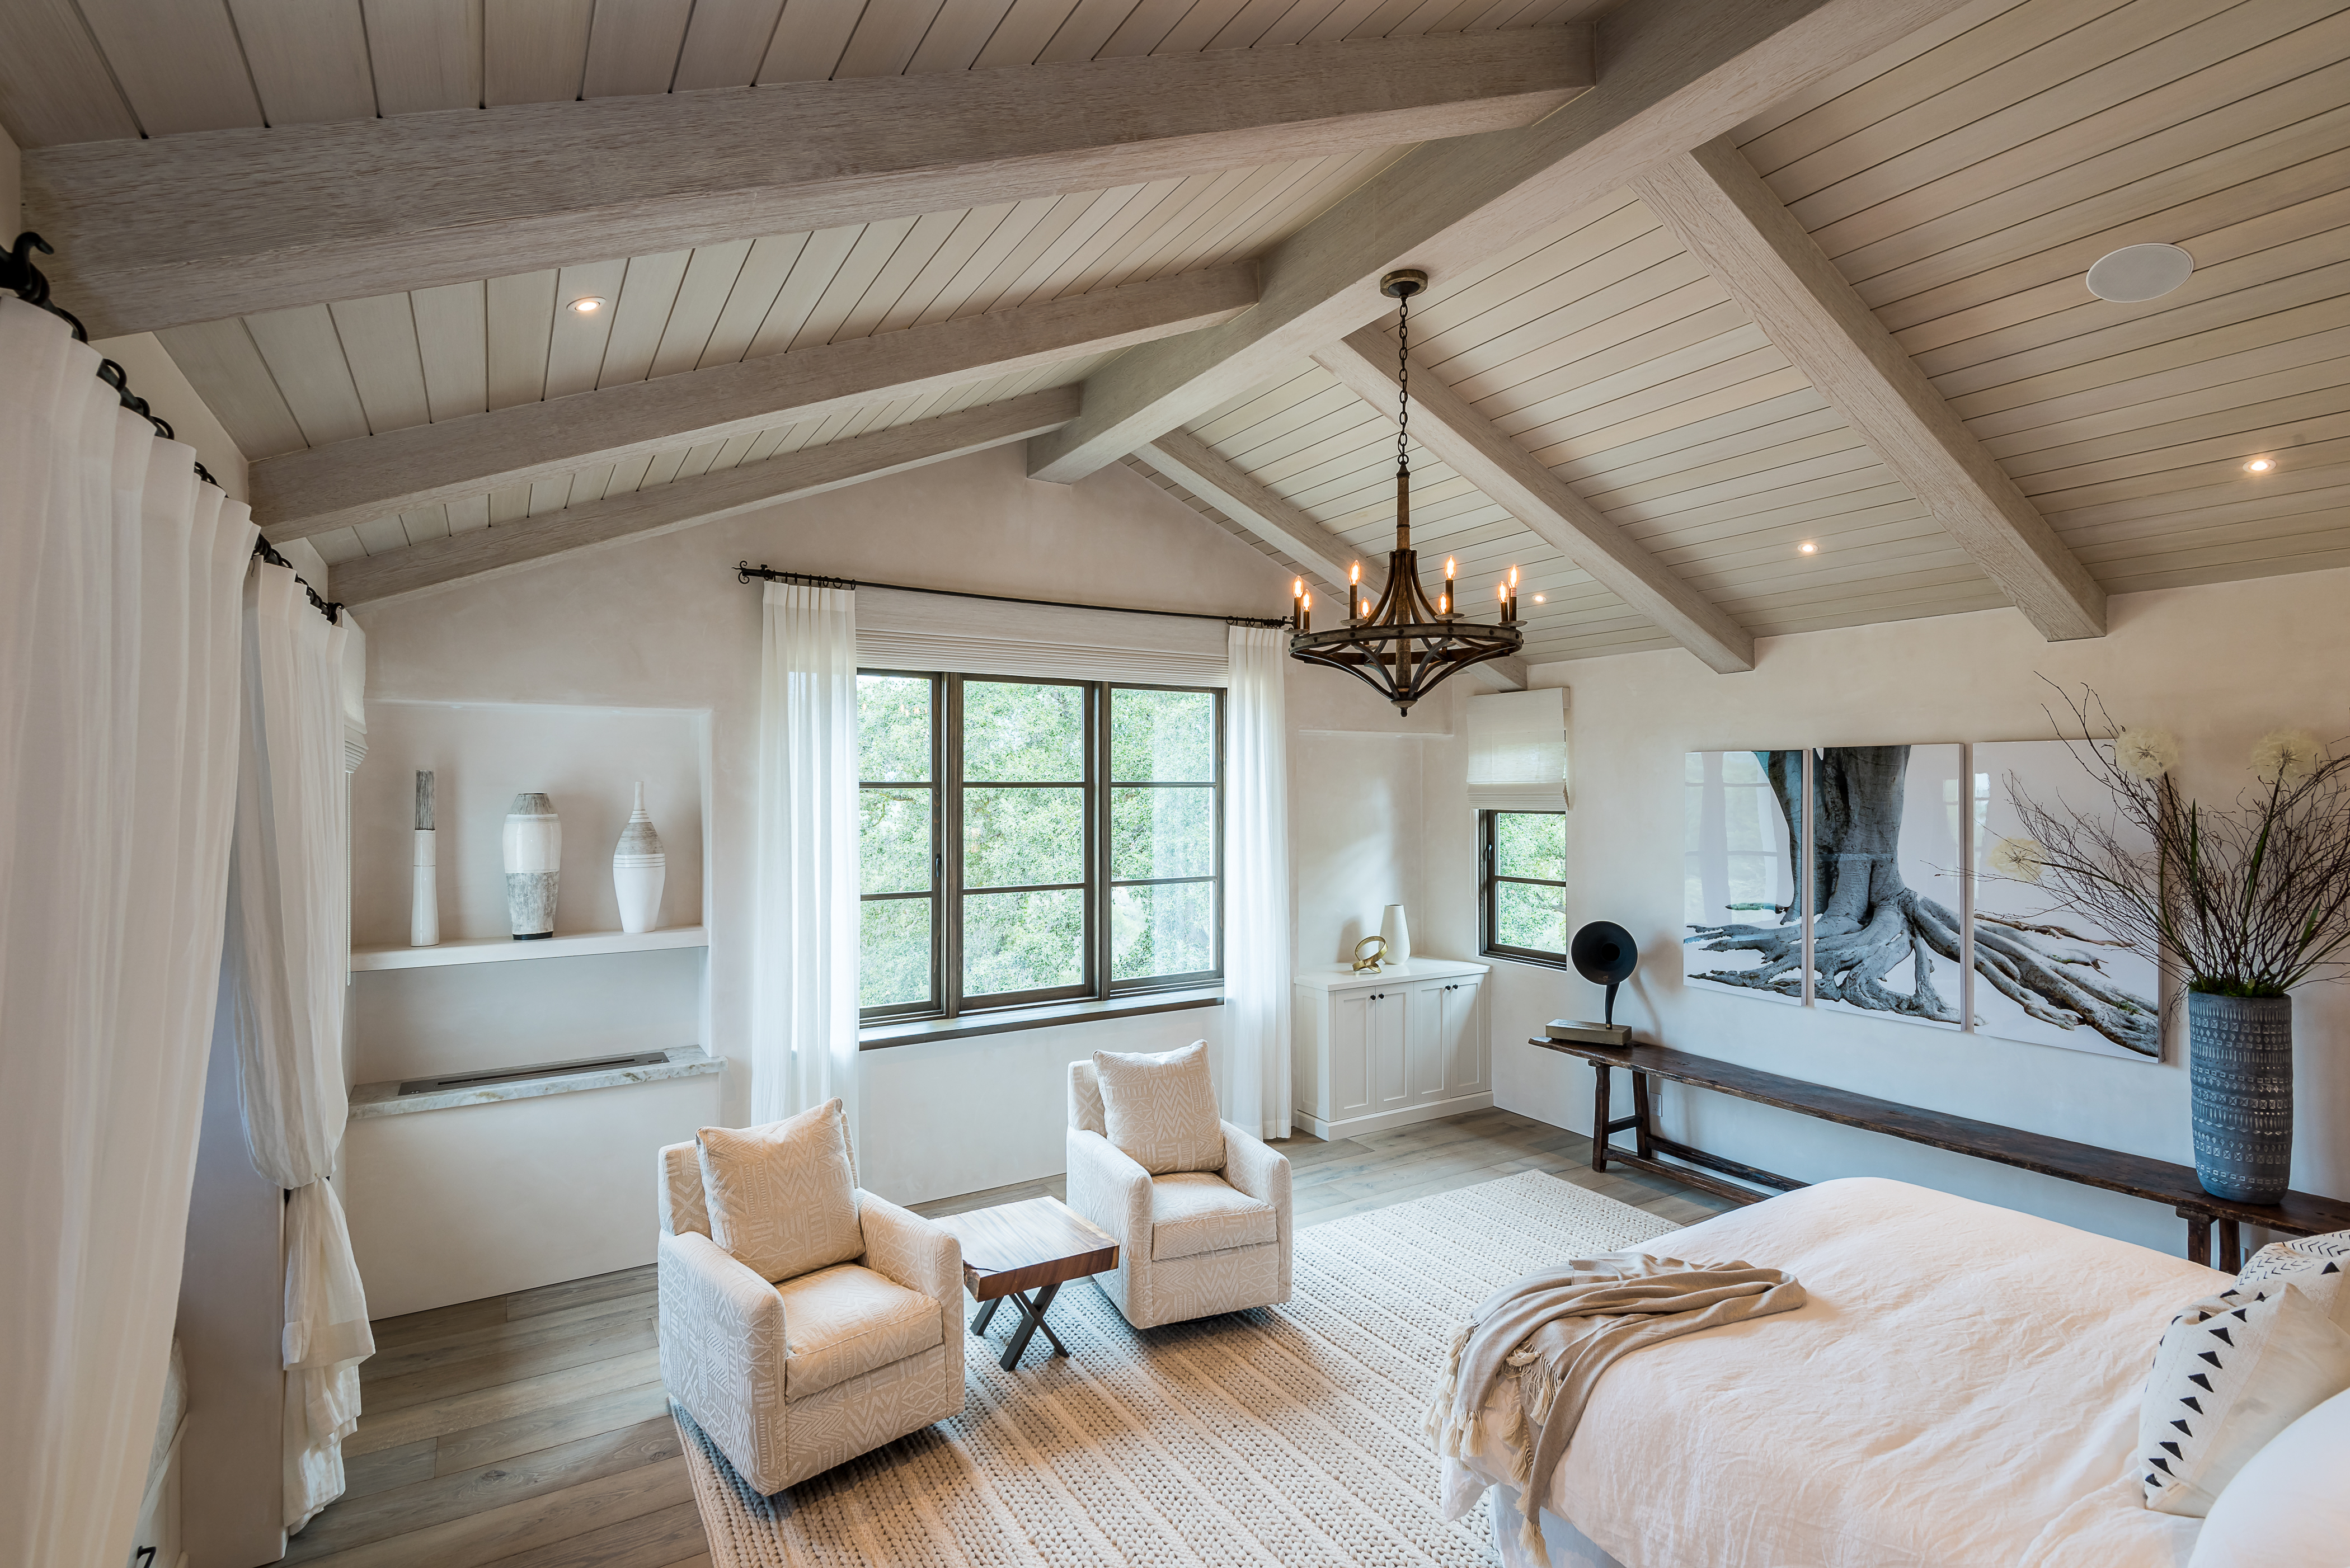 Shiplap vaulted ceiling with beams